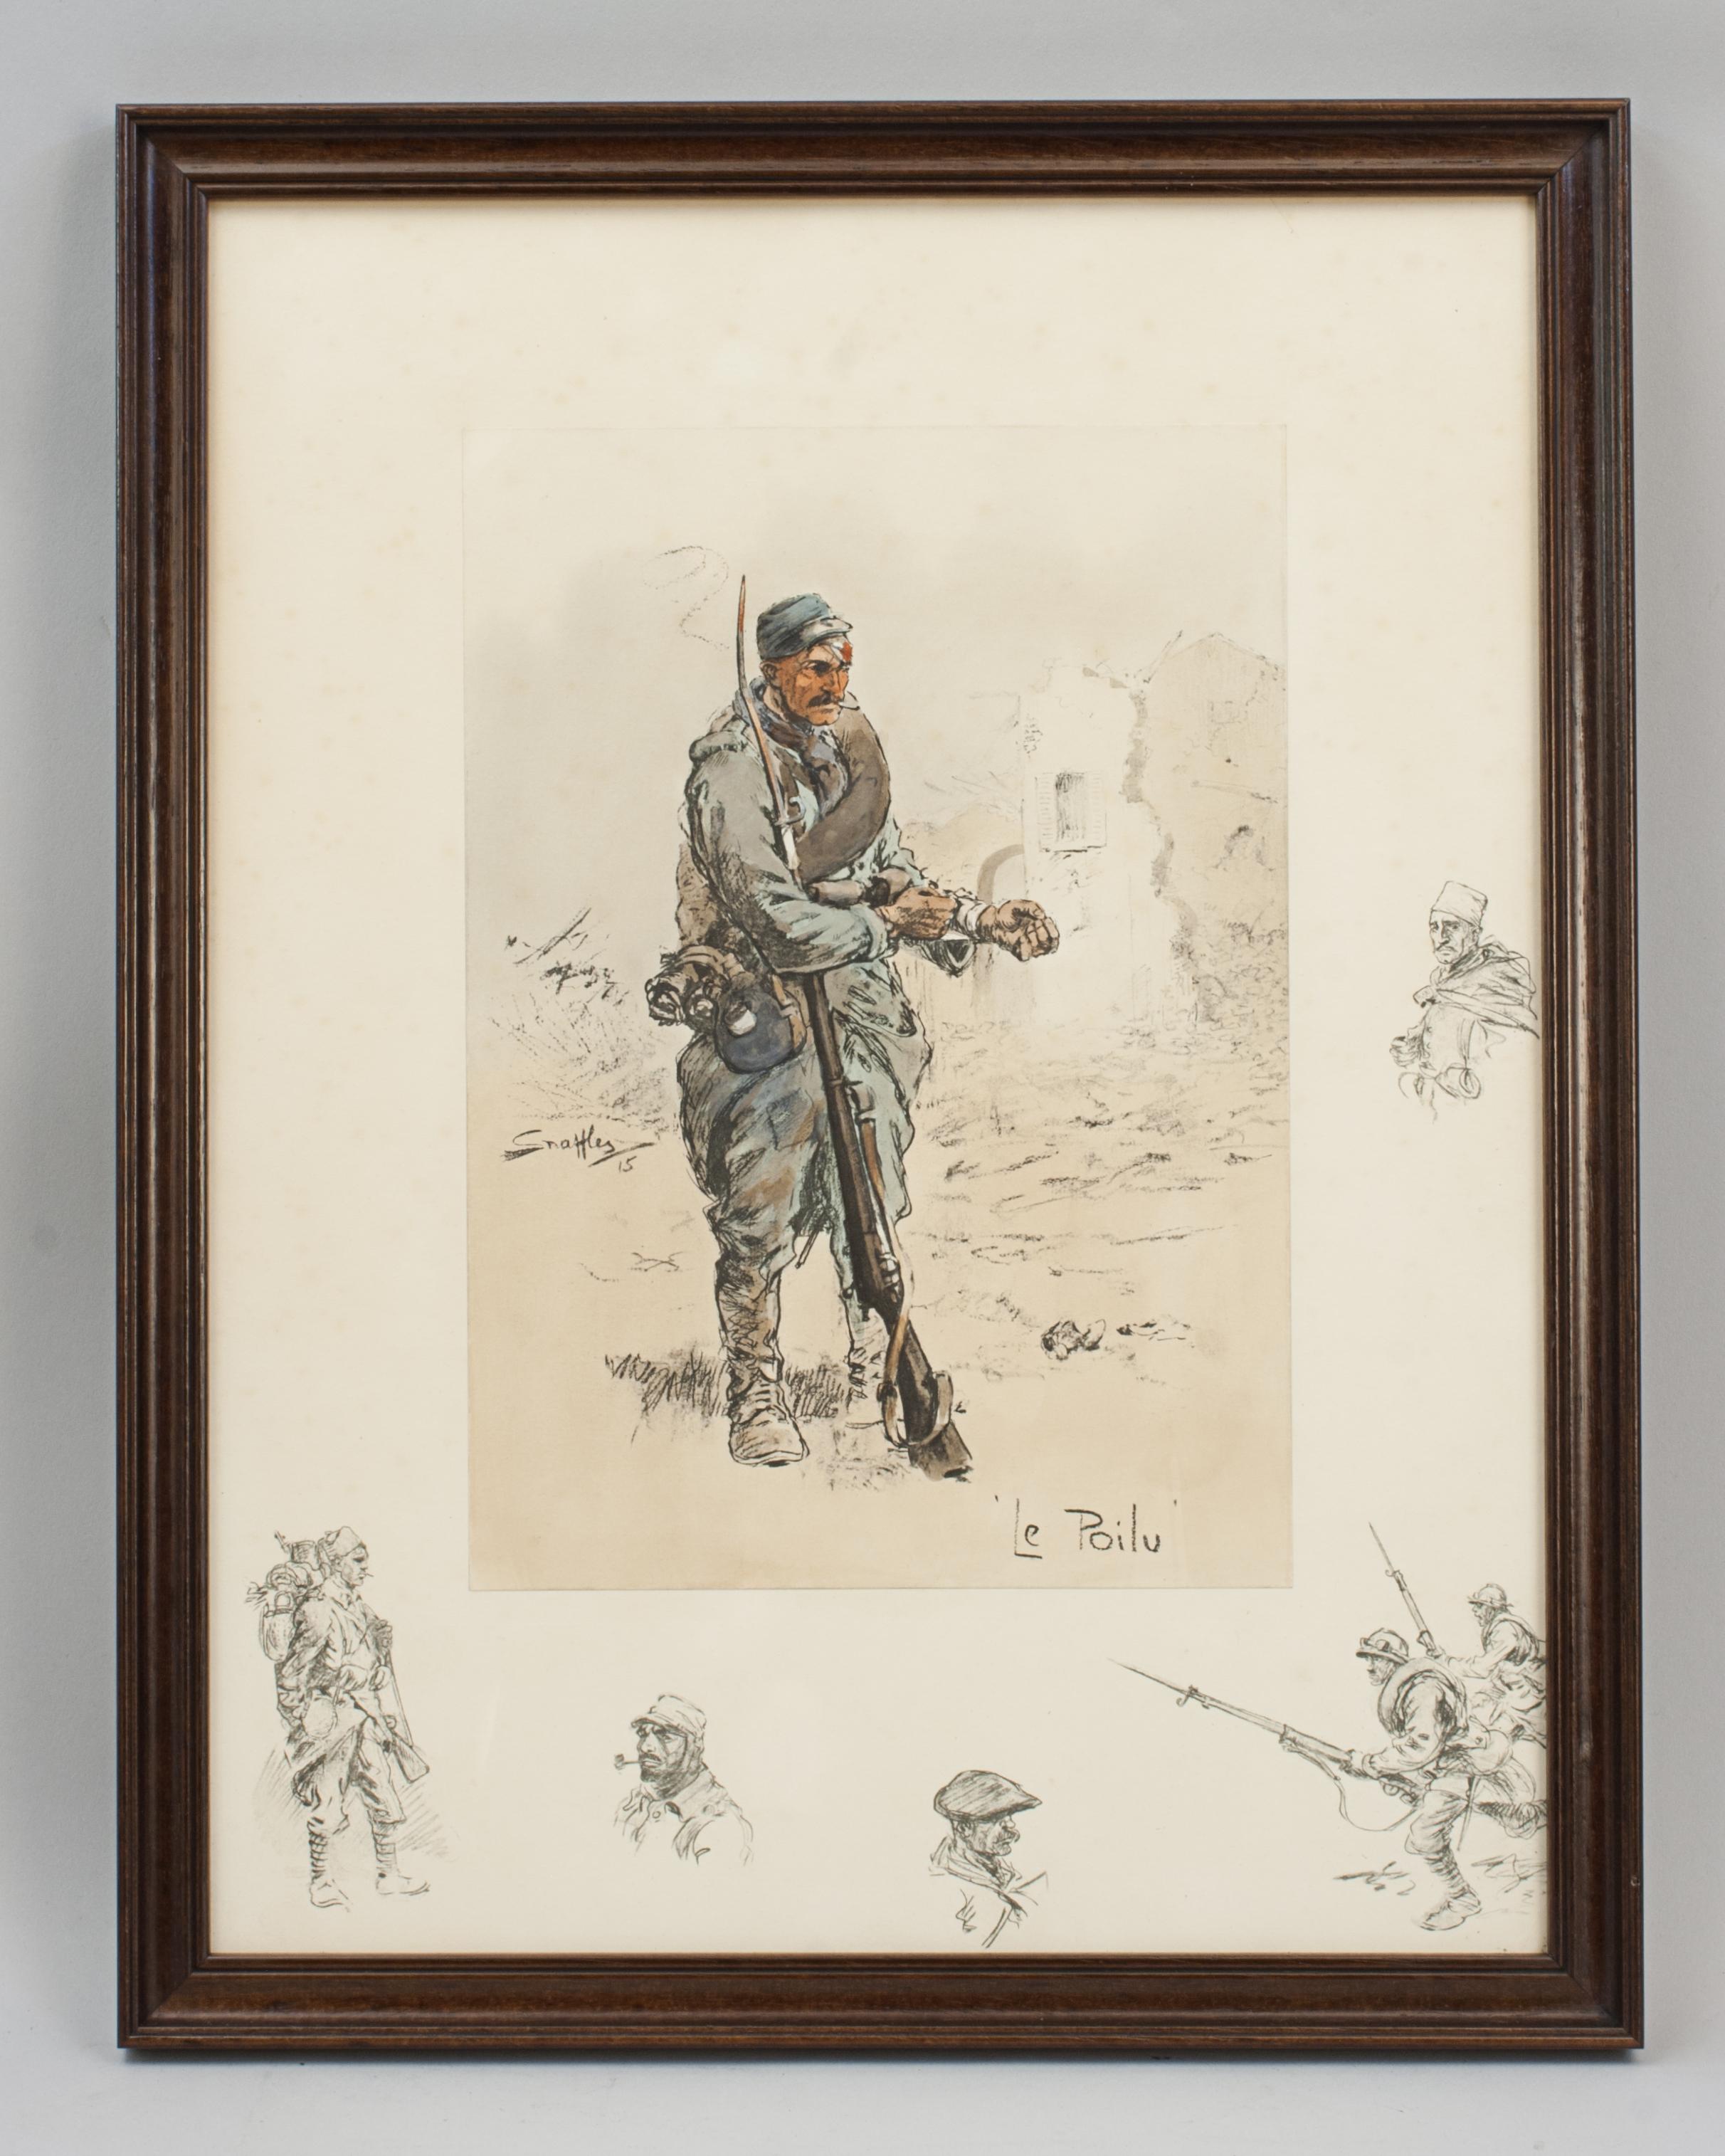 Vintage Snaffles First World War Print, Le Poilu.
A good Snaffles WWI military print 'Le Poilu'. The main center colour-piece image is mounted onto the printed remarque board.The Snaffles hand coloured lithograph shows a wounded French infantryman